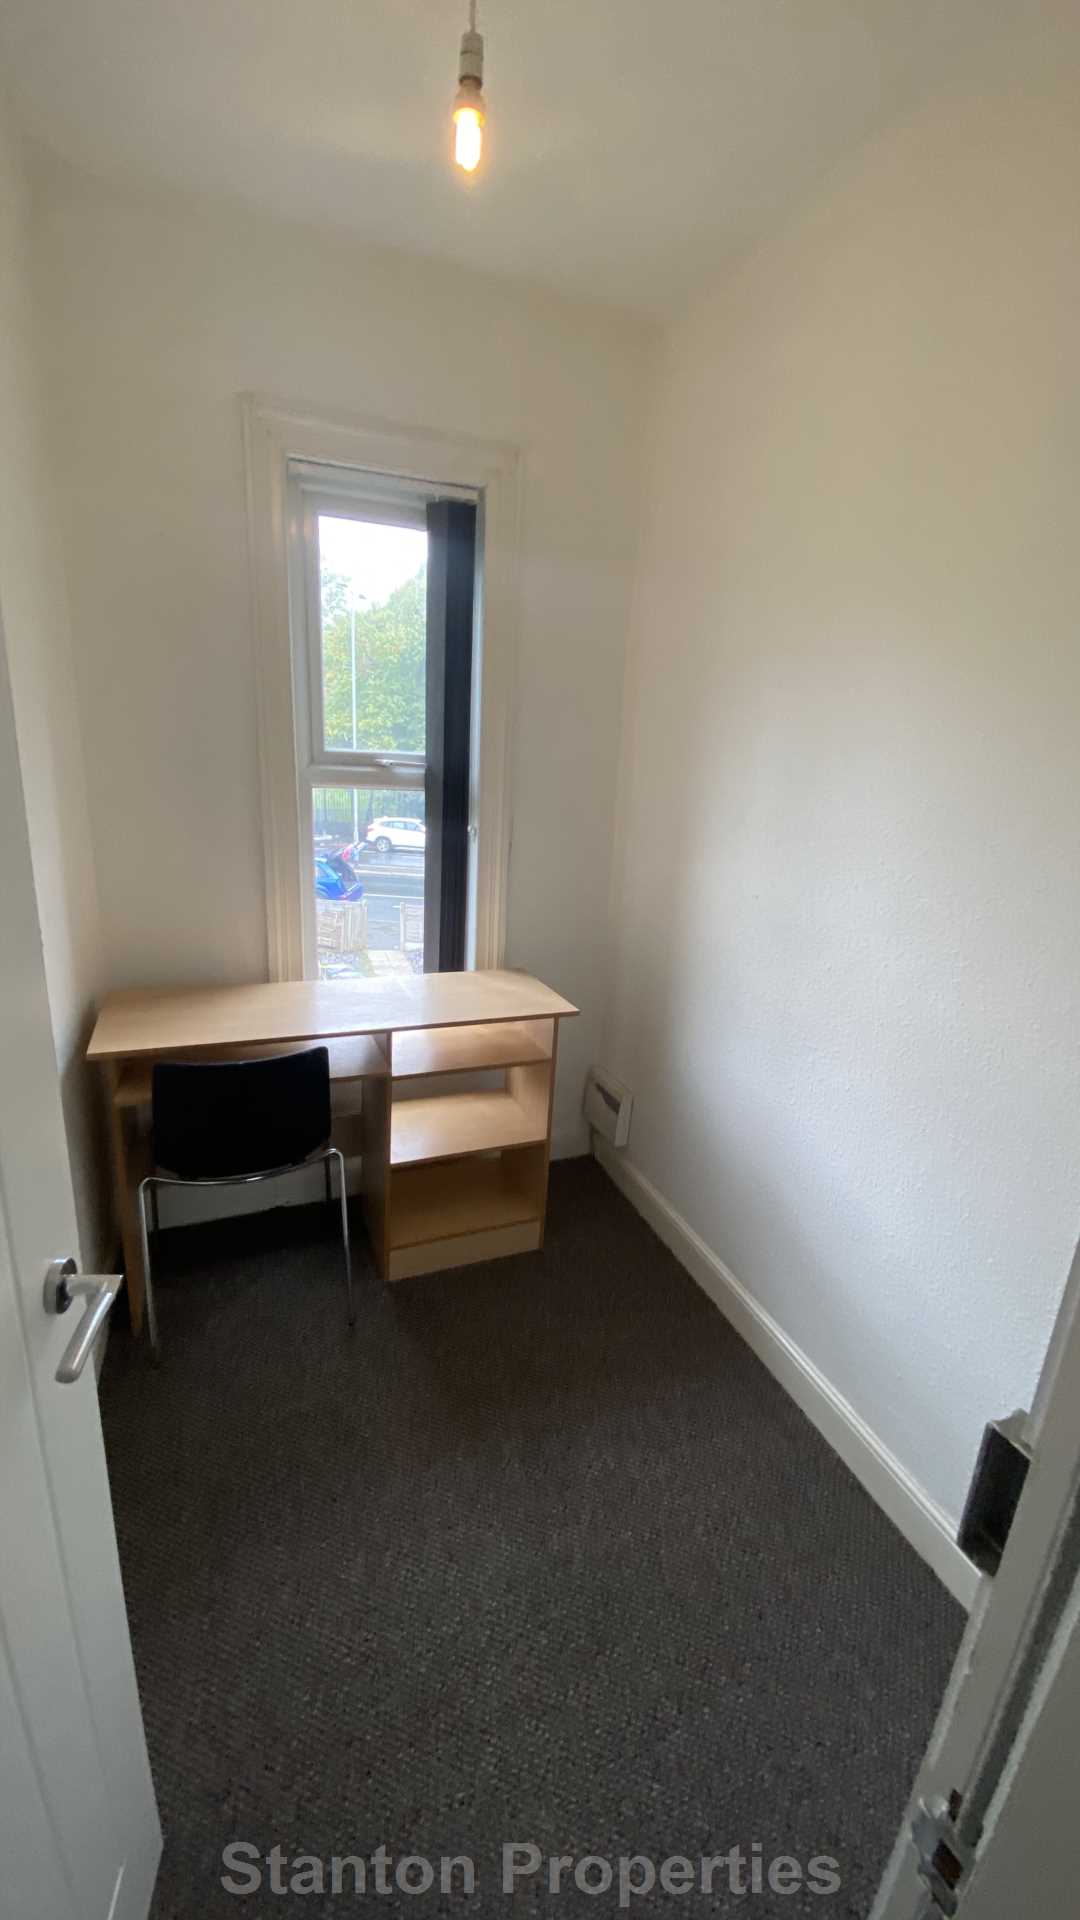 £130 pppw, Moseley Road, Fallowfield, M14 6NR, Image 20